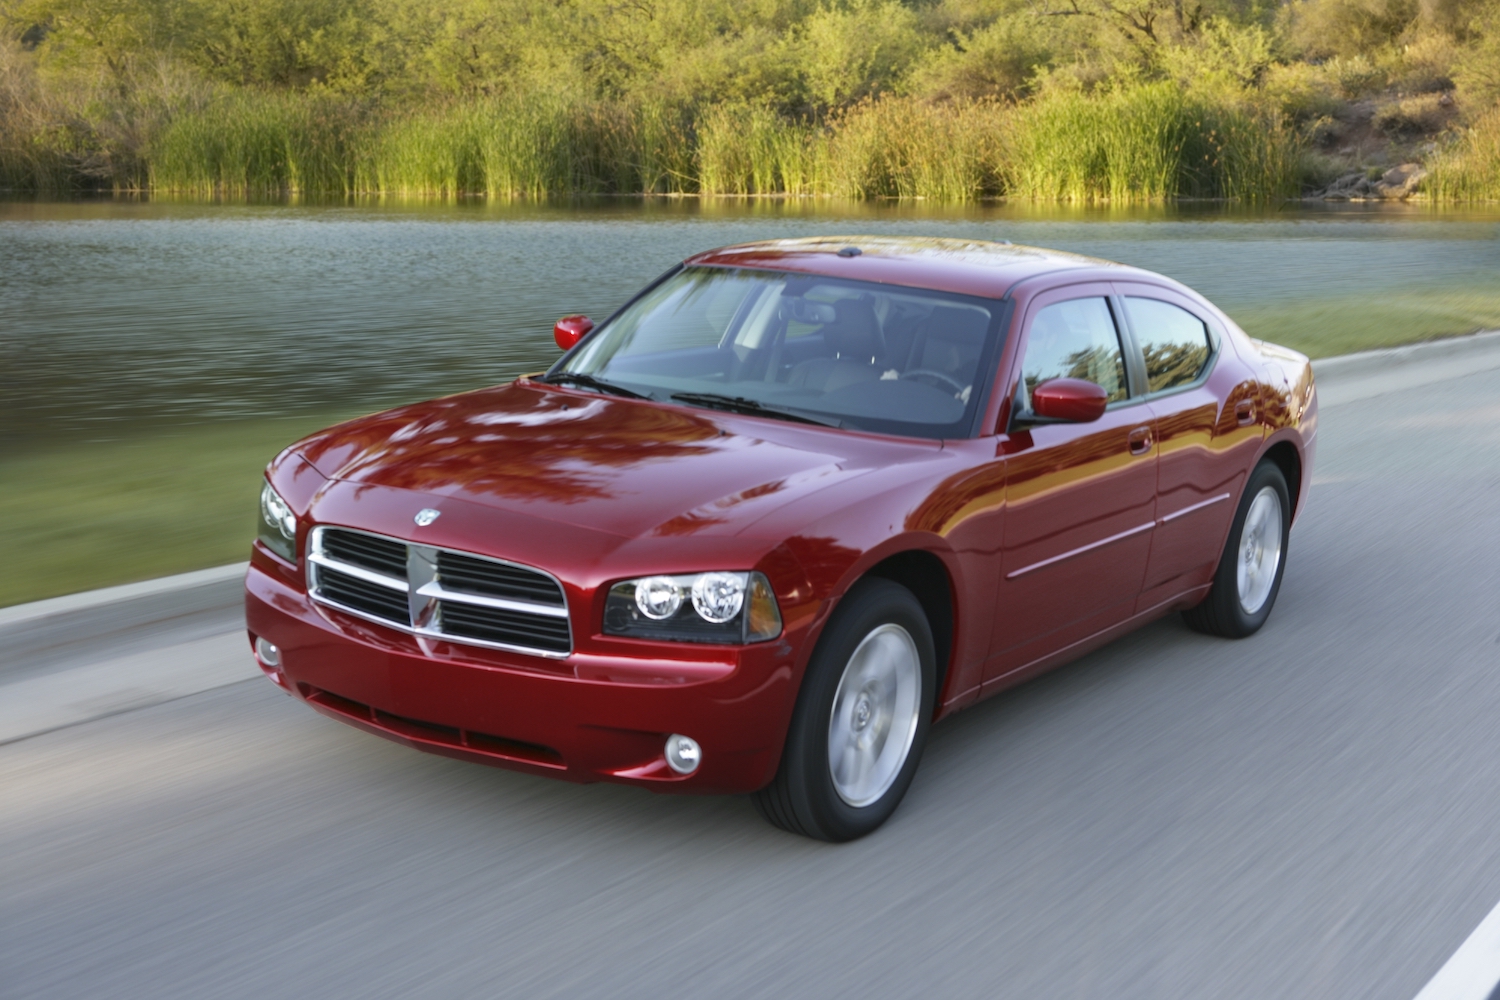 Red 2010 Dodge charger driving along a remote road, a pond visible in the background.